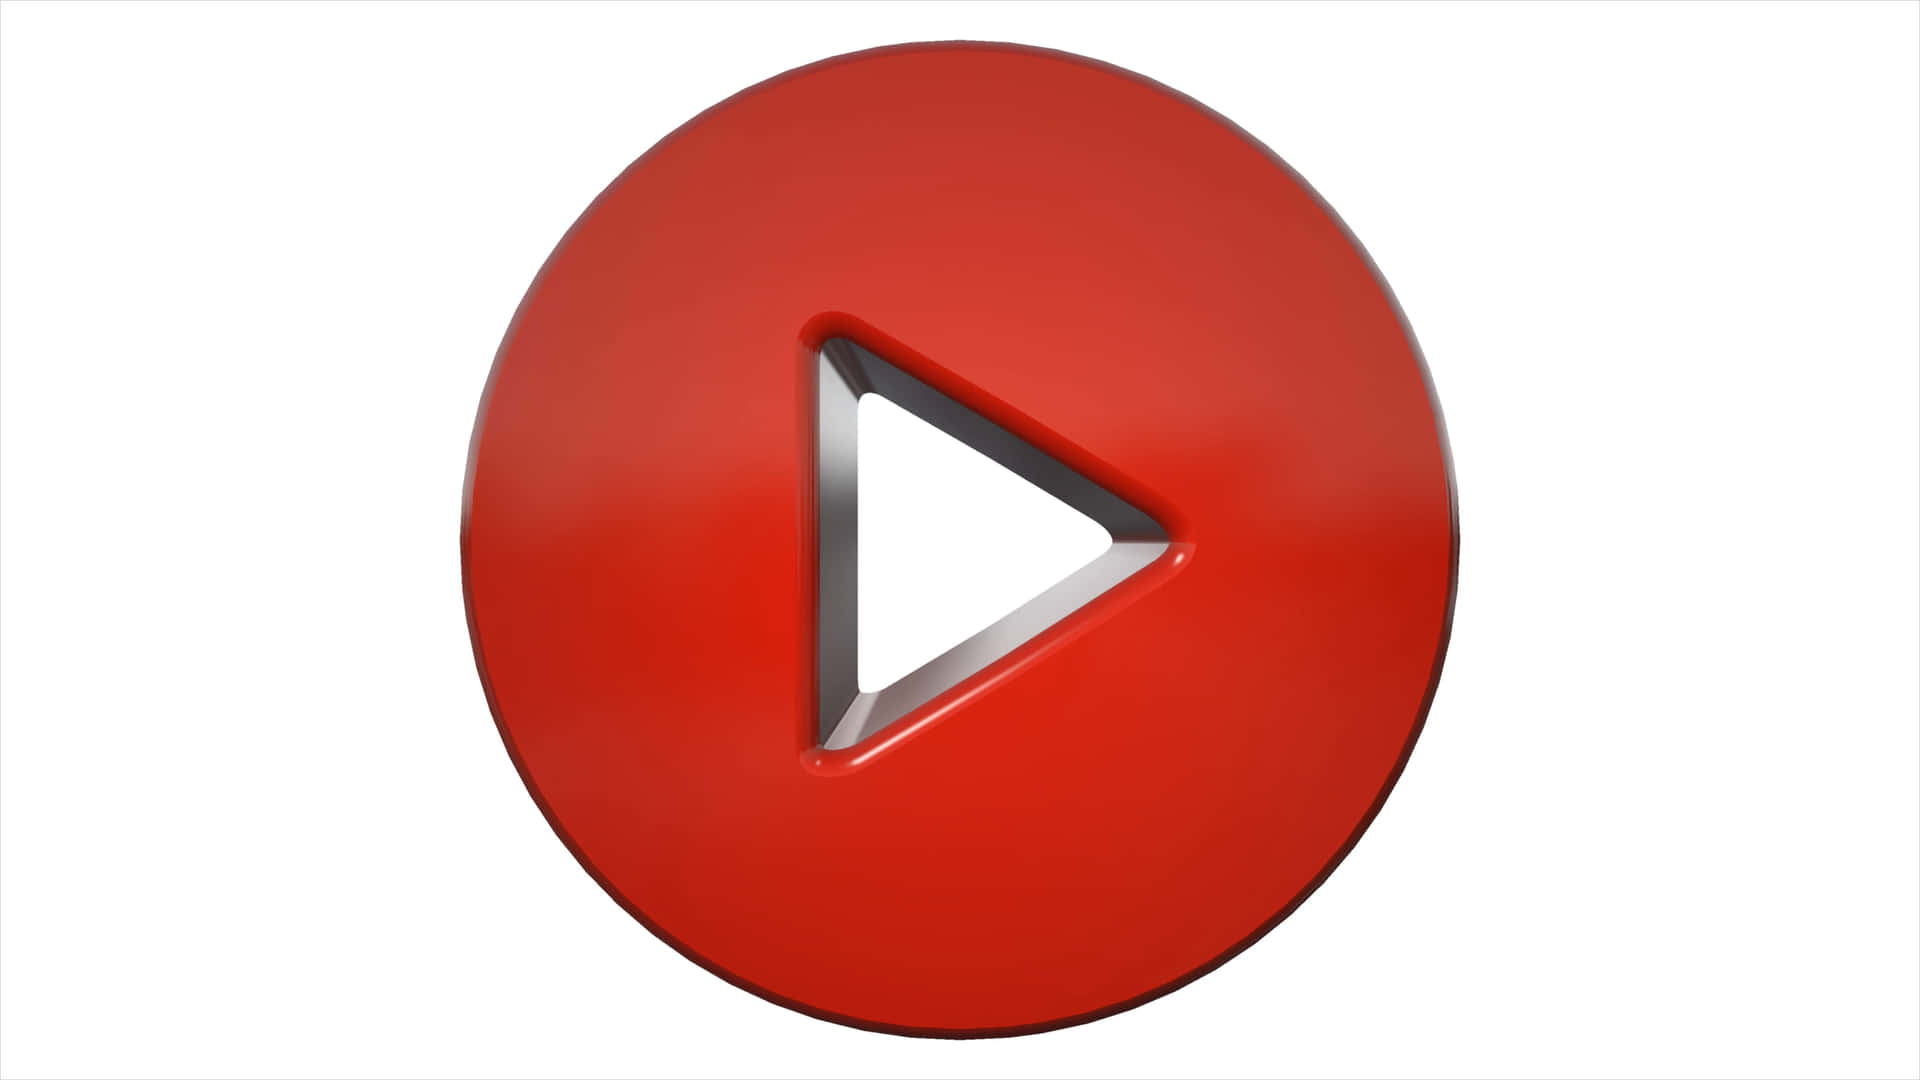 A Red Play Button On A White Background